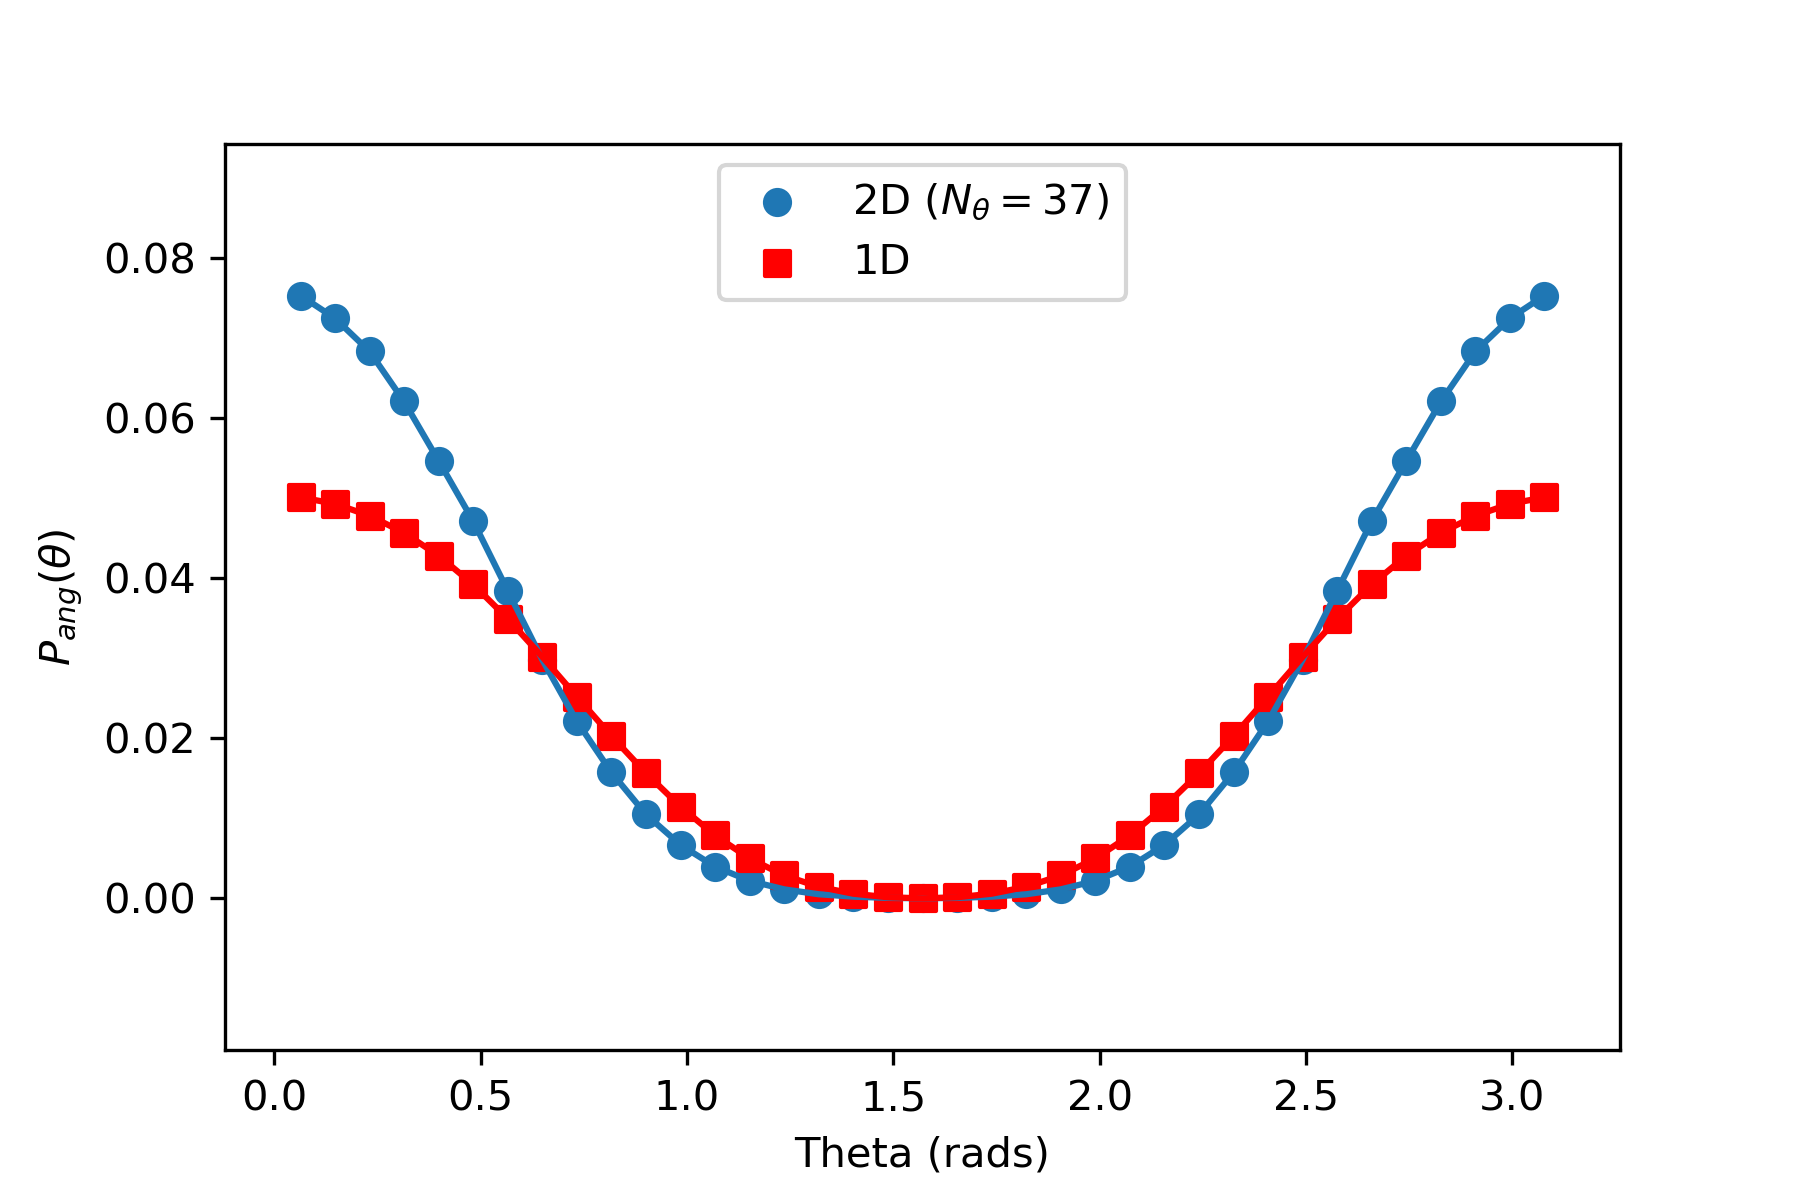 The angular dissociation probability, with the 2D calculation allowing for rotation and 1D calculation corresponding to a fixed molecule. The discrepancy at 0 and Pi rads shows enhancement of dissociation from the allowed rotation. This calculation was done with a peak intensity of 3*10^14 W/cm^2 .